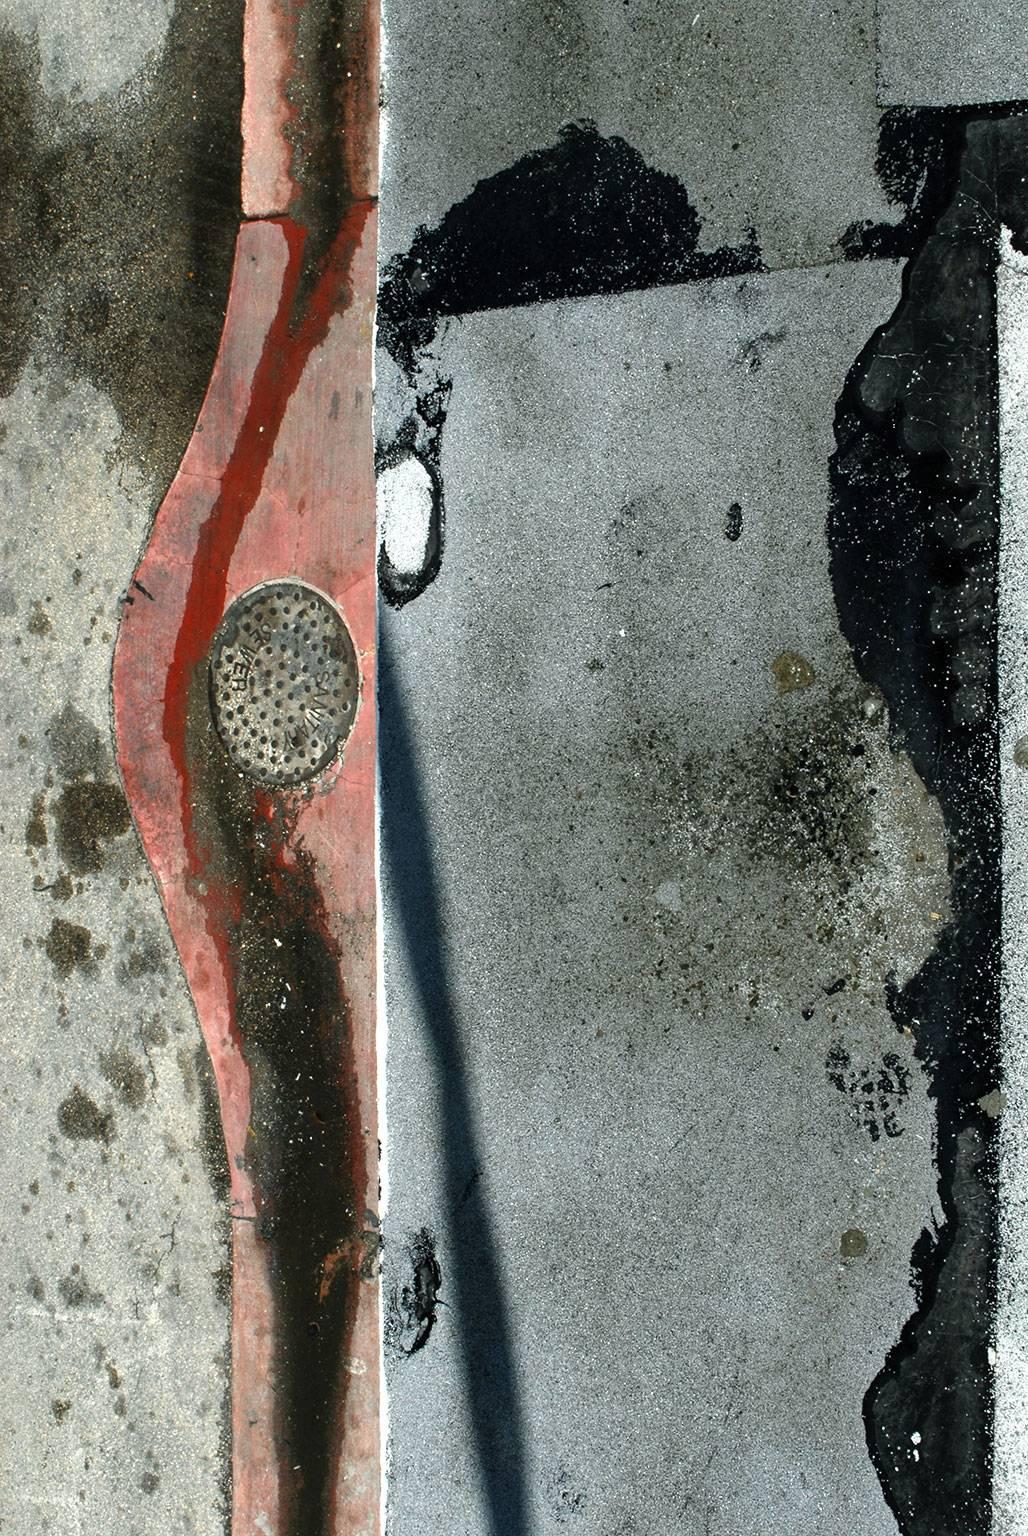 Francois Ilnseher Abstract Photograph - Asphalt #1 from the "Street Surfaces" series